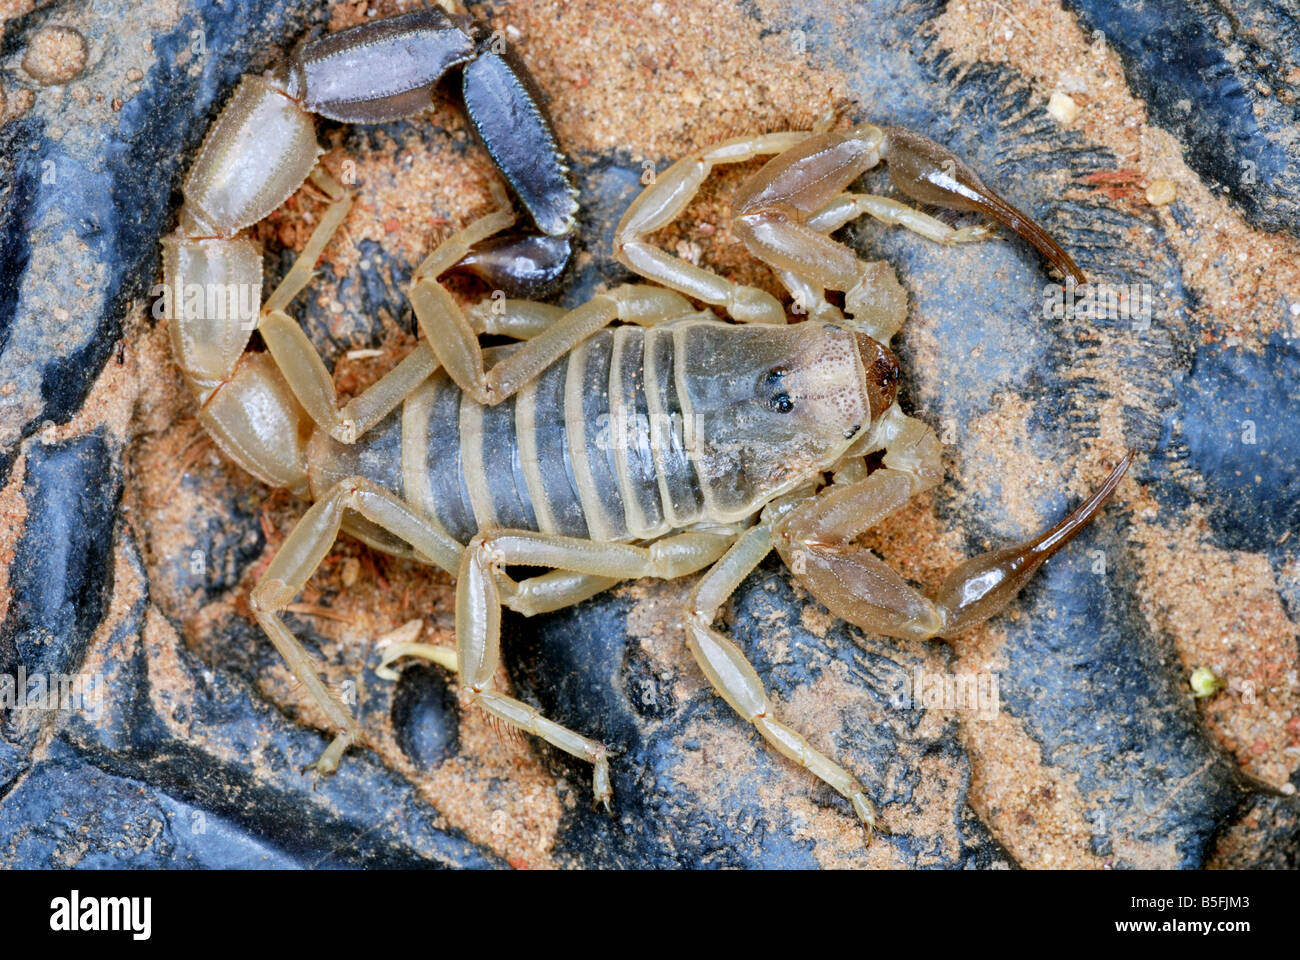 Androctonus finitimus  Family BUTHIDAE a species of scorpion. Strictly confined to the desert areas. highly toxic venom. Stock Photo